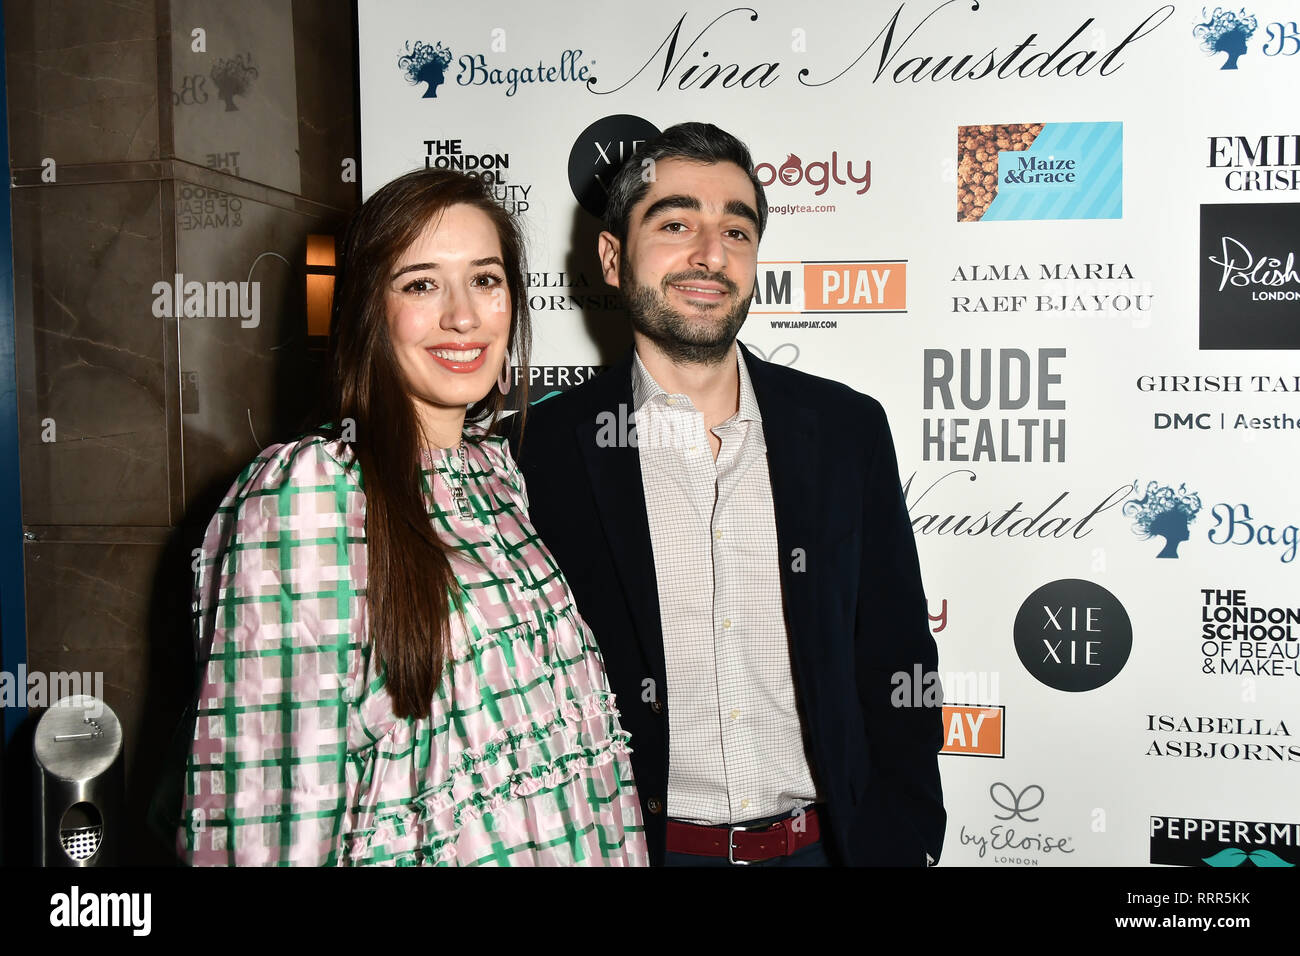 London, UK. 26th Feb 2019. Sponsor Maize & Grace Arrivers at Nina Naustdal catwalk show SS19/20 collection by The London School of Beauty & Make-up at Bagatelle on 26 Feb 2019, London, UK. Credit: Picture Capital/Alamy Live News Stock Photo